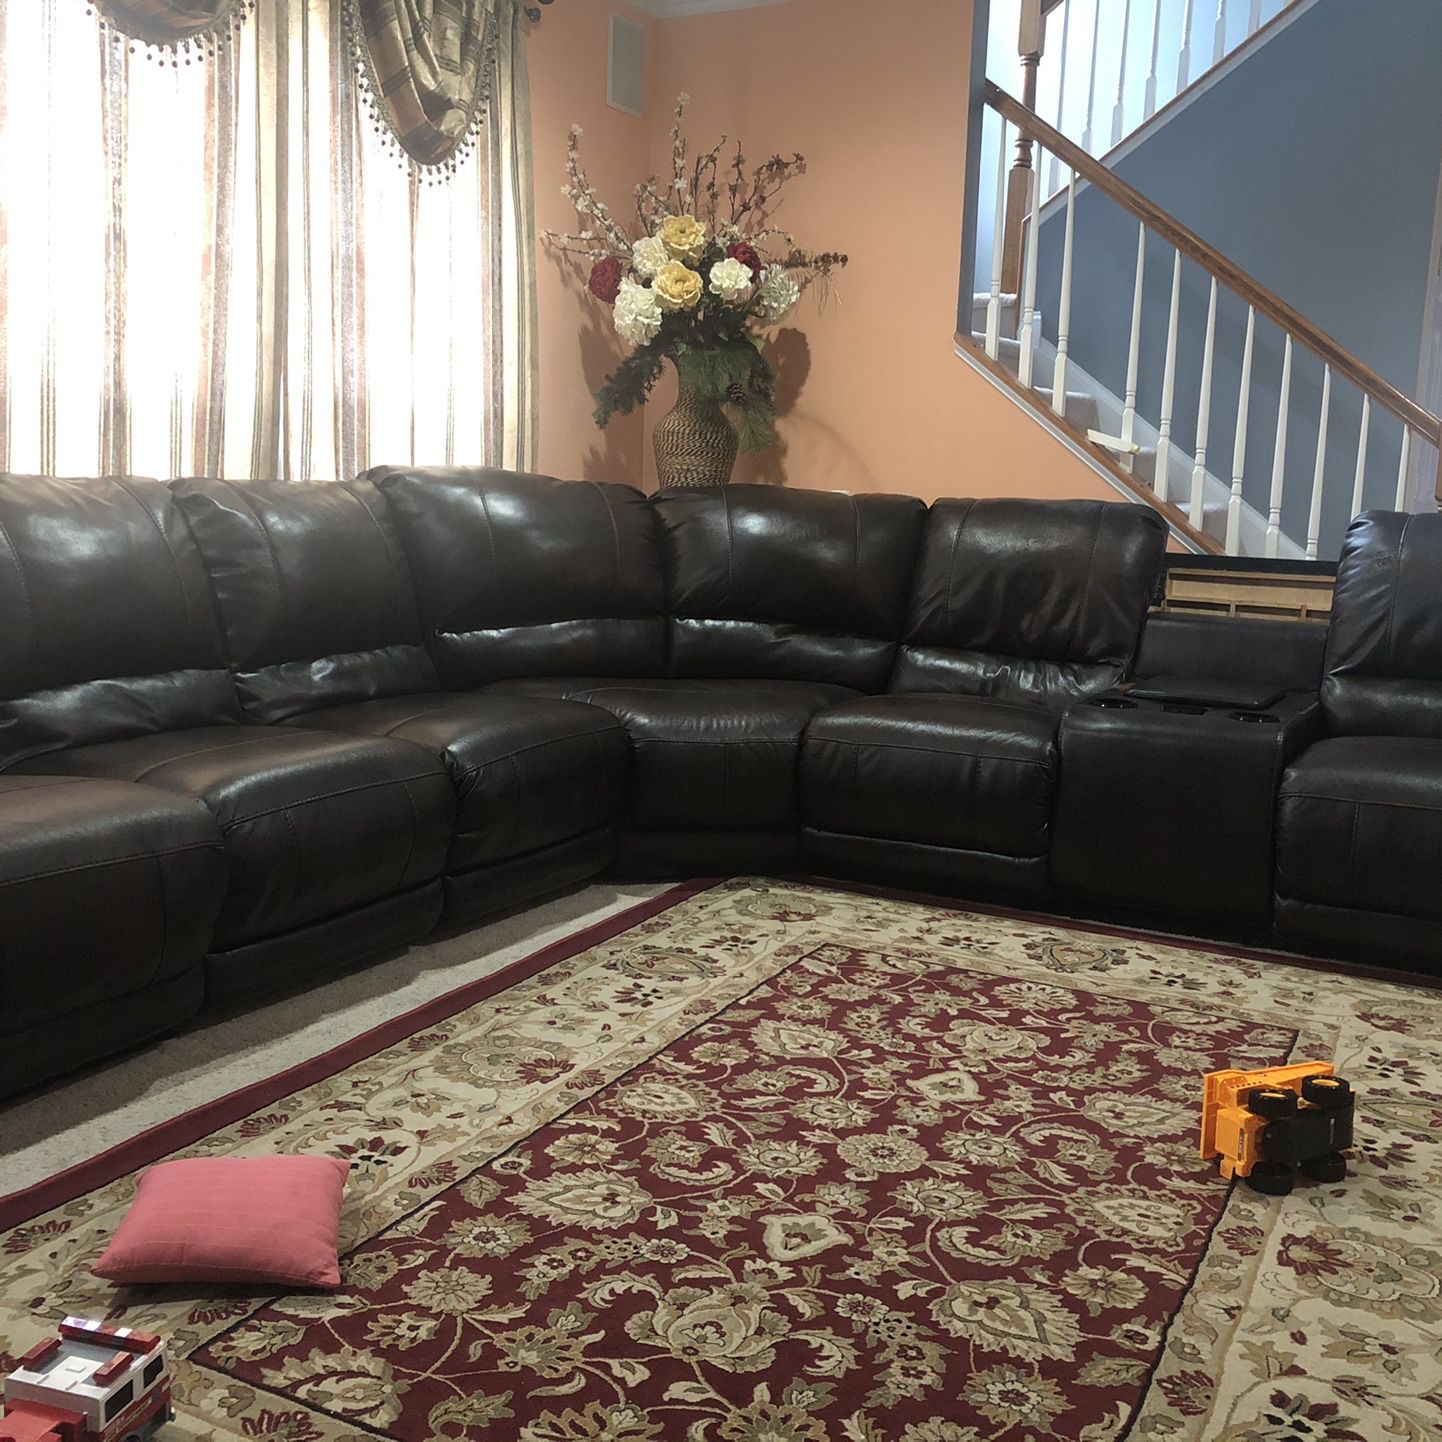 Power Reclining Leather Sectional Sofa